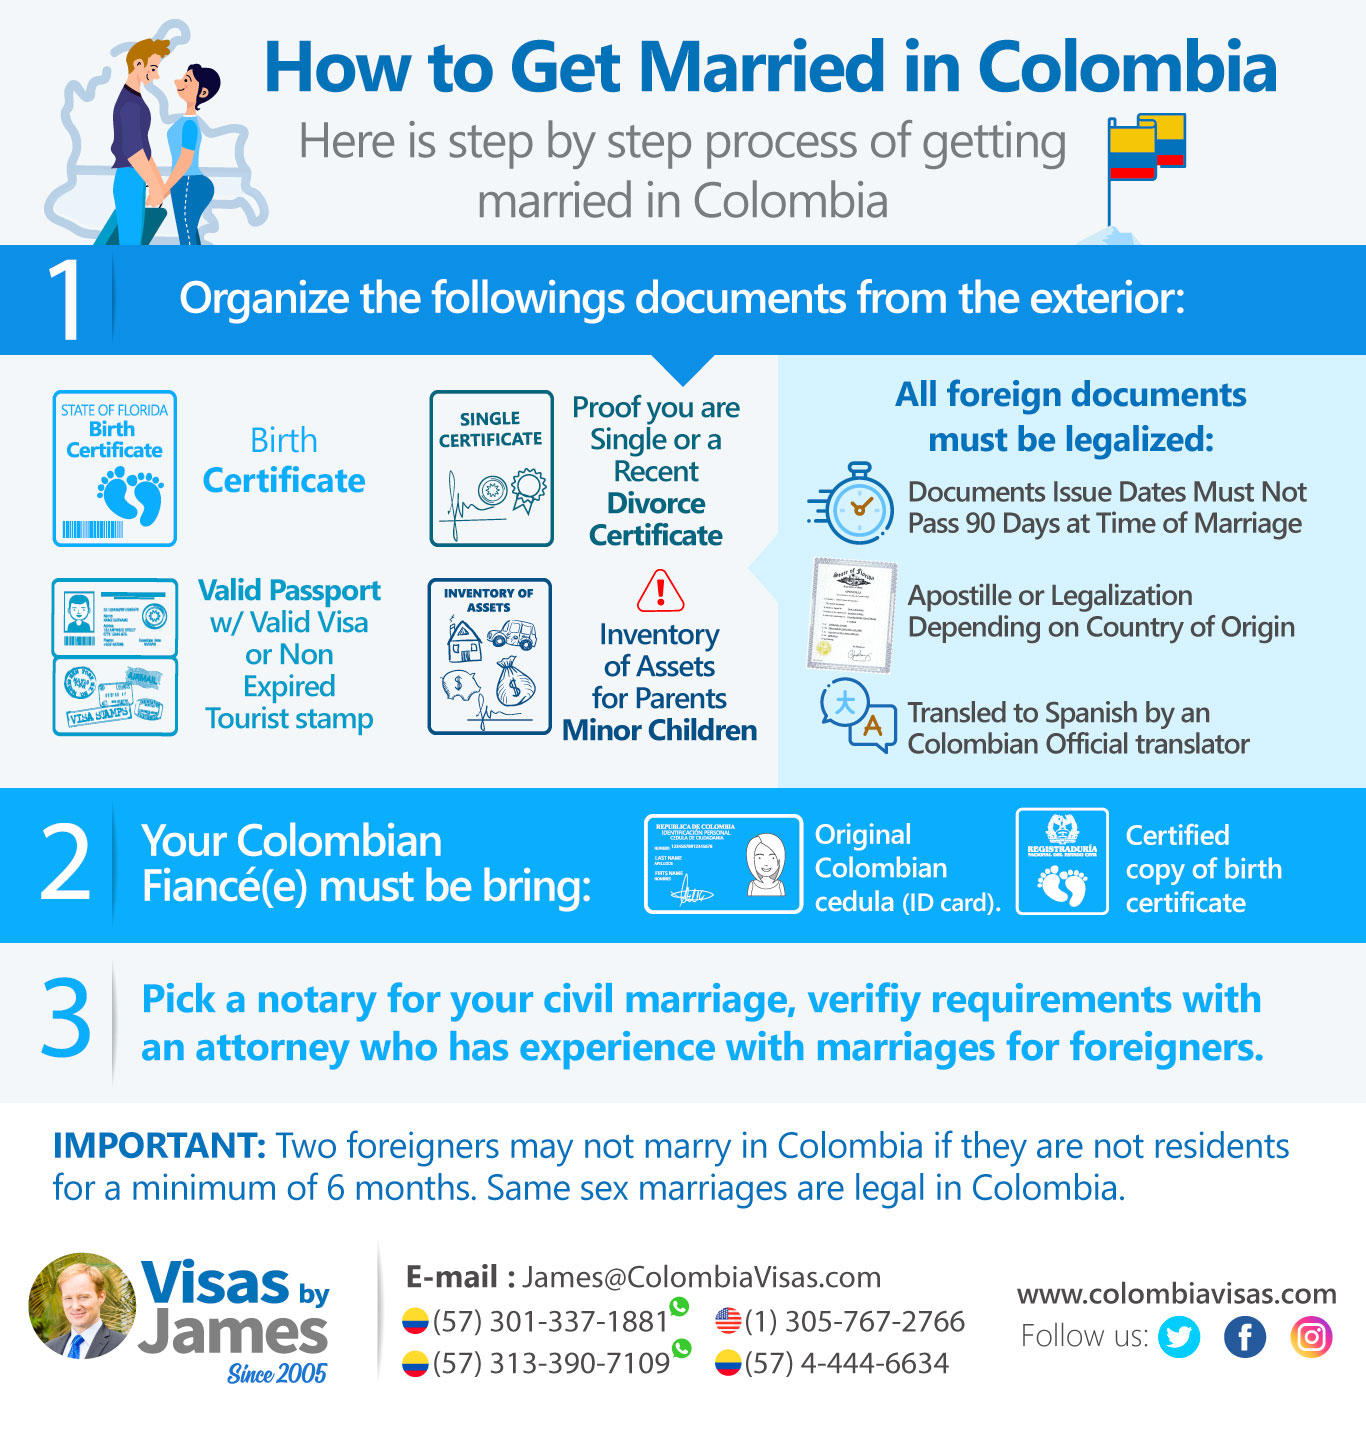 How to Get Married in Colombia